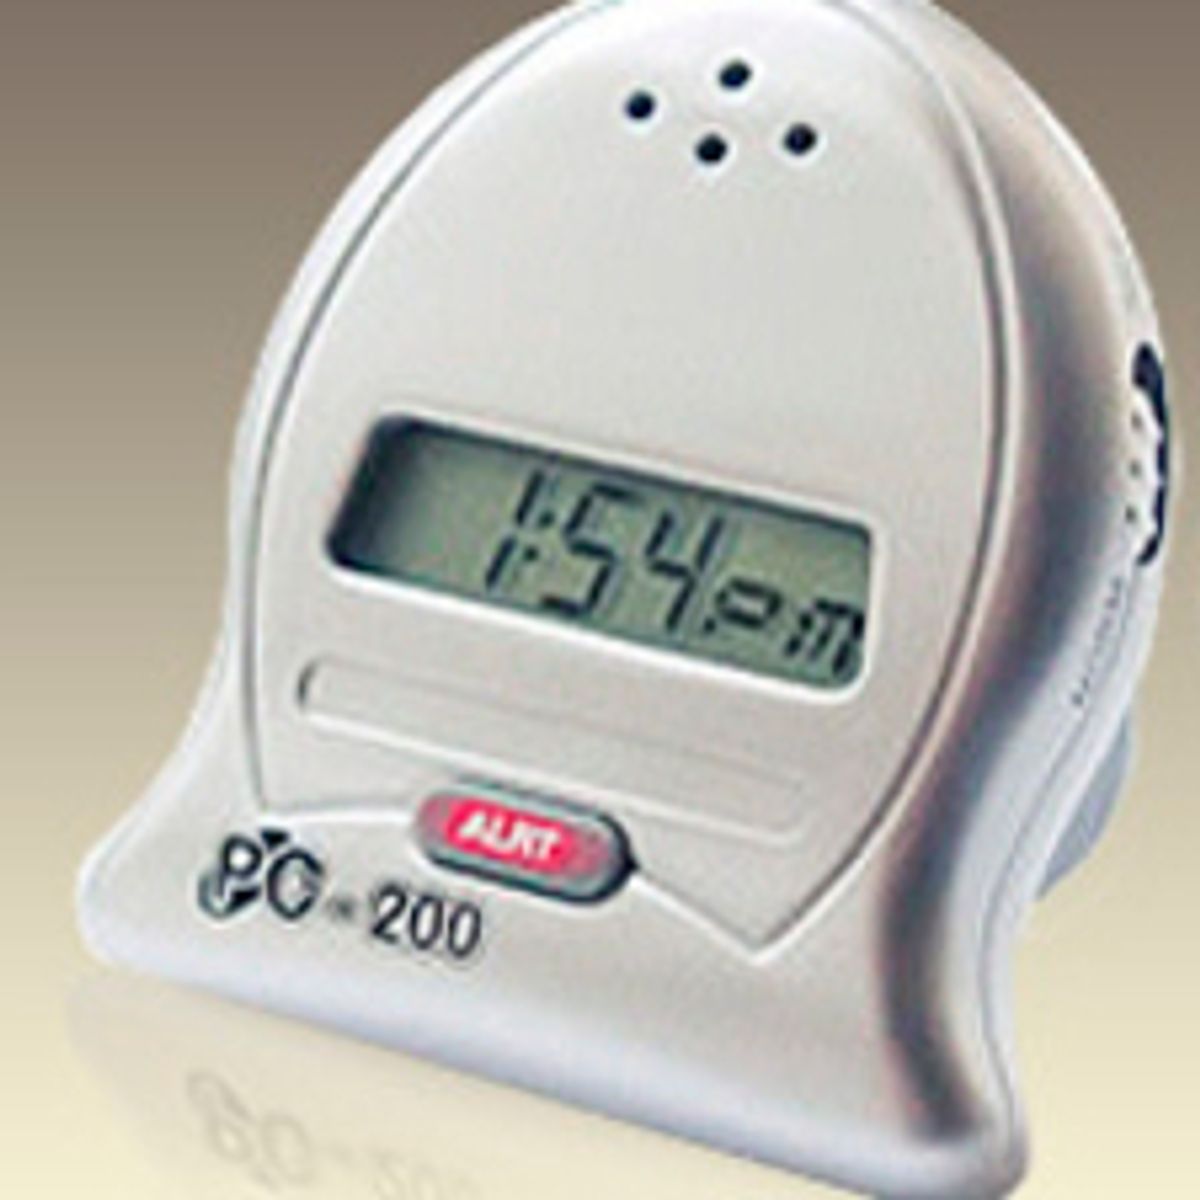 Electronic Pocket Alarms Don't Help HIV Patients